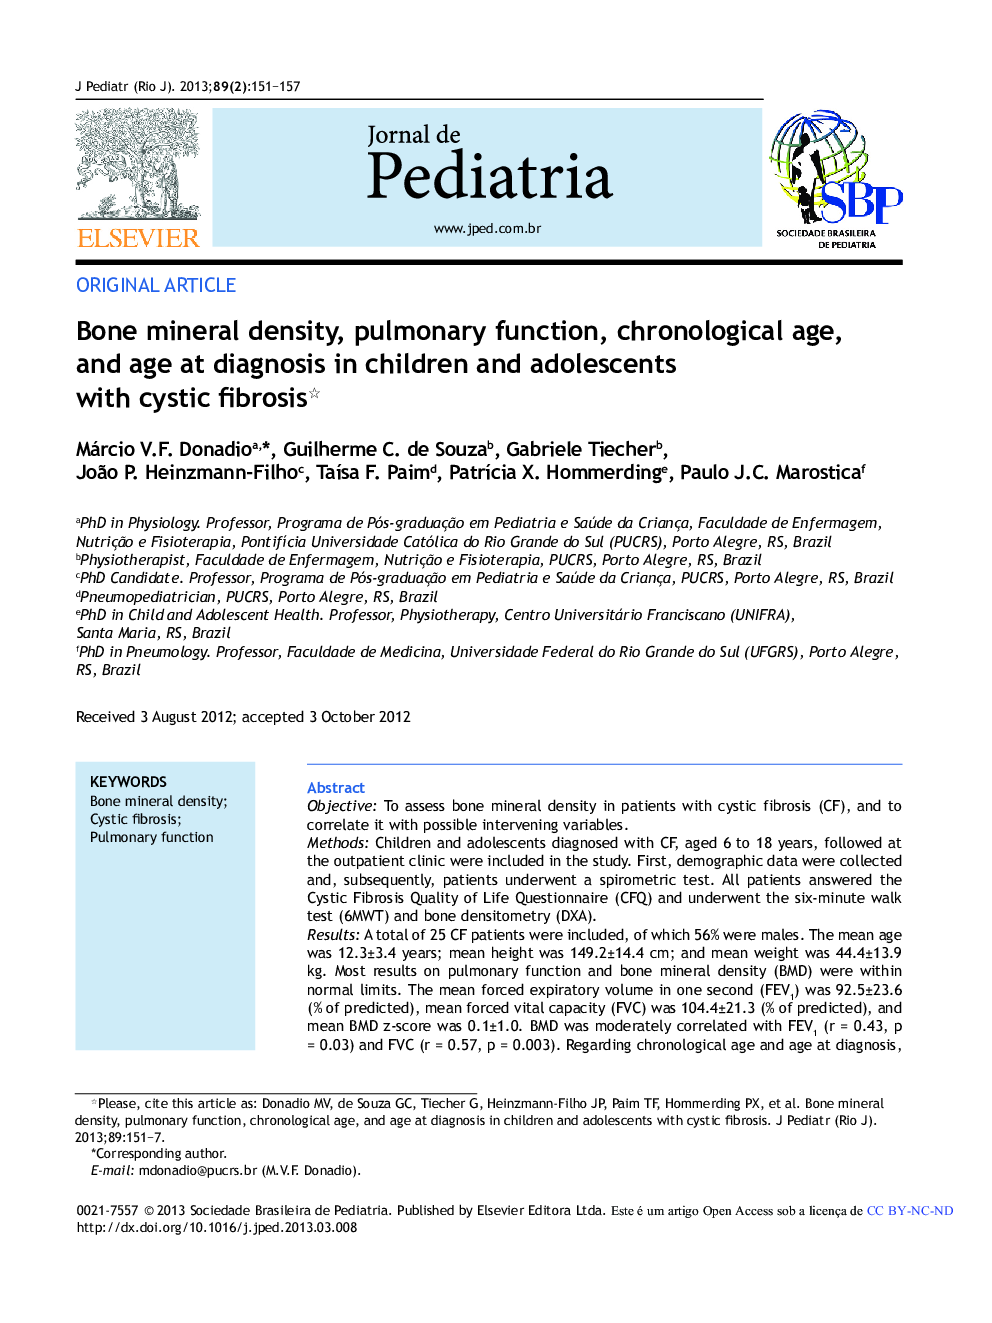 Bone mineral density, pulmonary function, chronological age, and age at diagnosis in children and adolescents with cystic fibrosis *